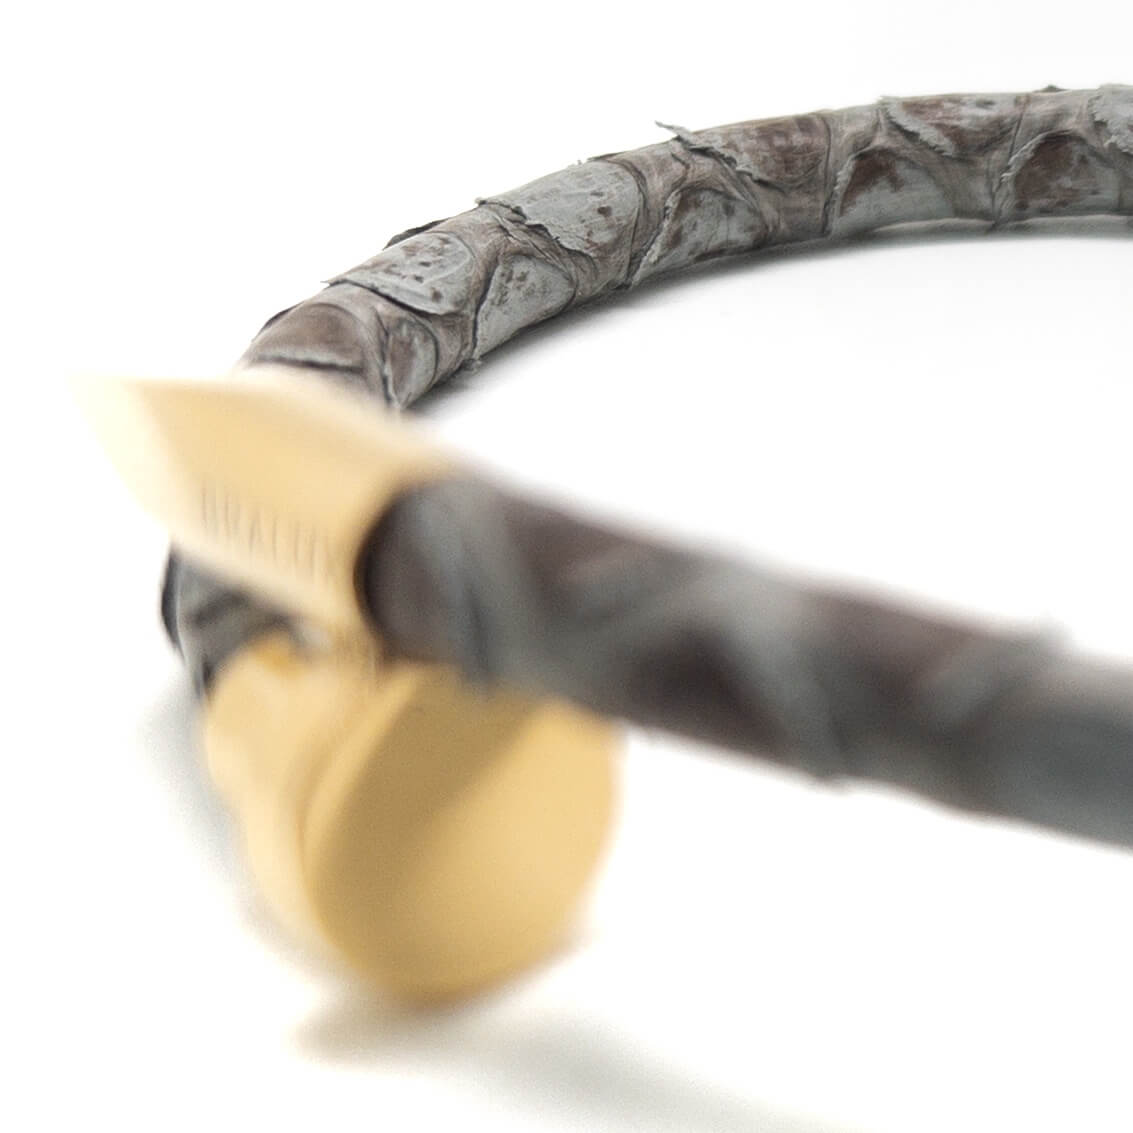 The Gold Plated Nail and Grey Exotic Leather Bracelet